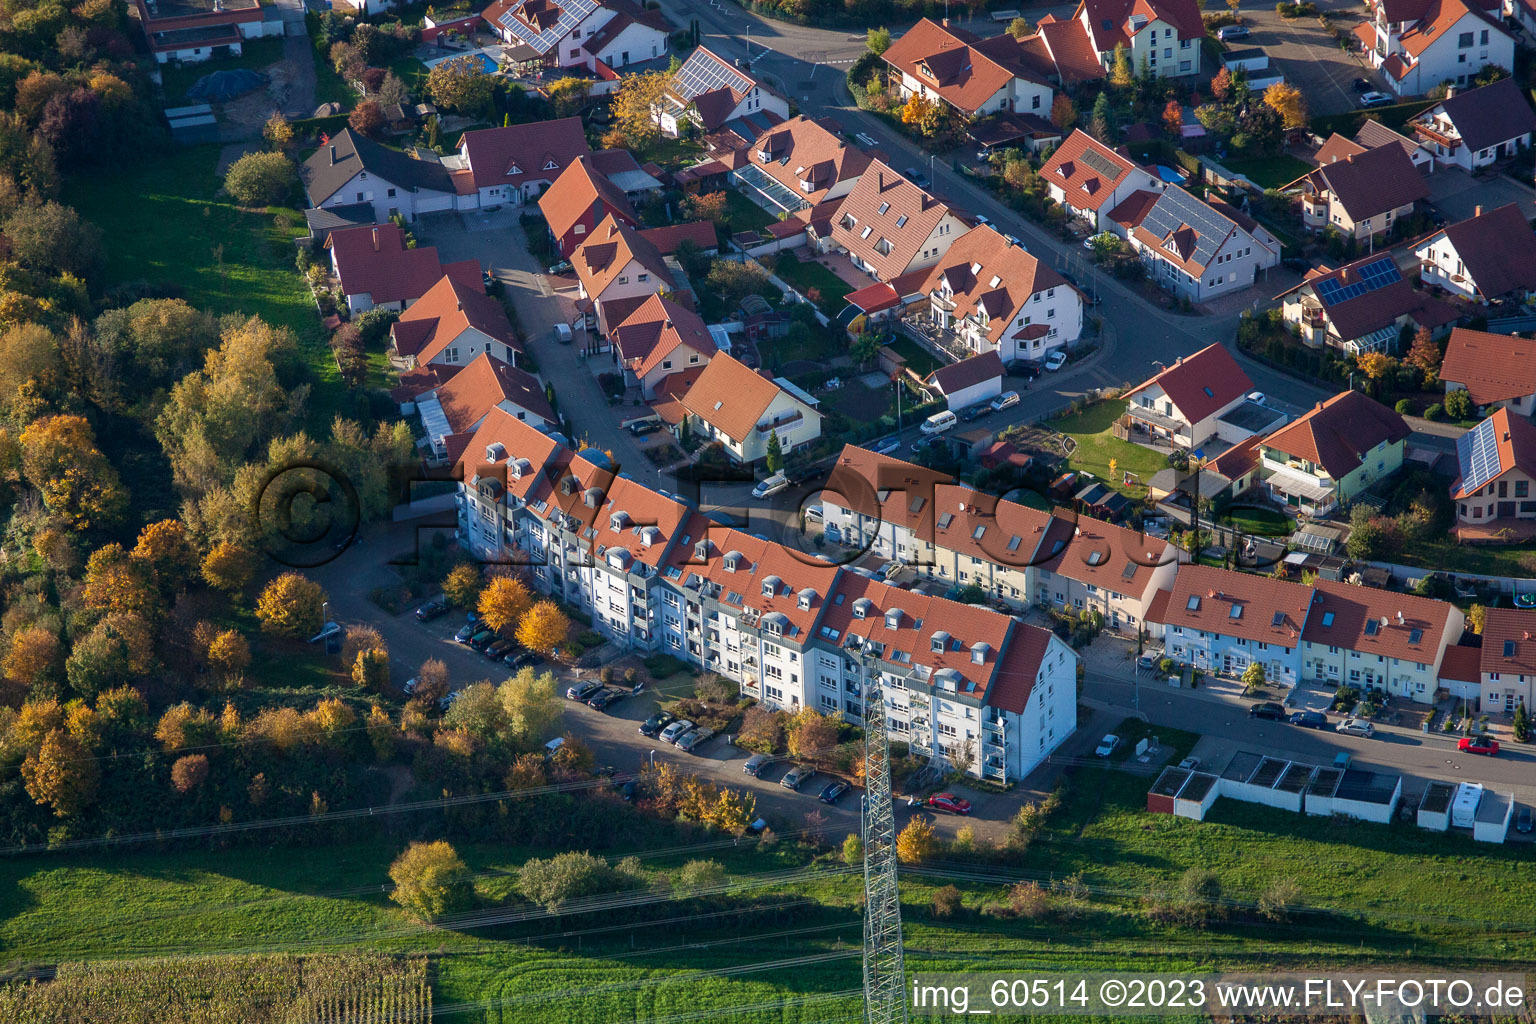 Aerial photograpy of S in Rülzheim in the state Rhineland-Palatinate, Germany